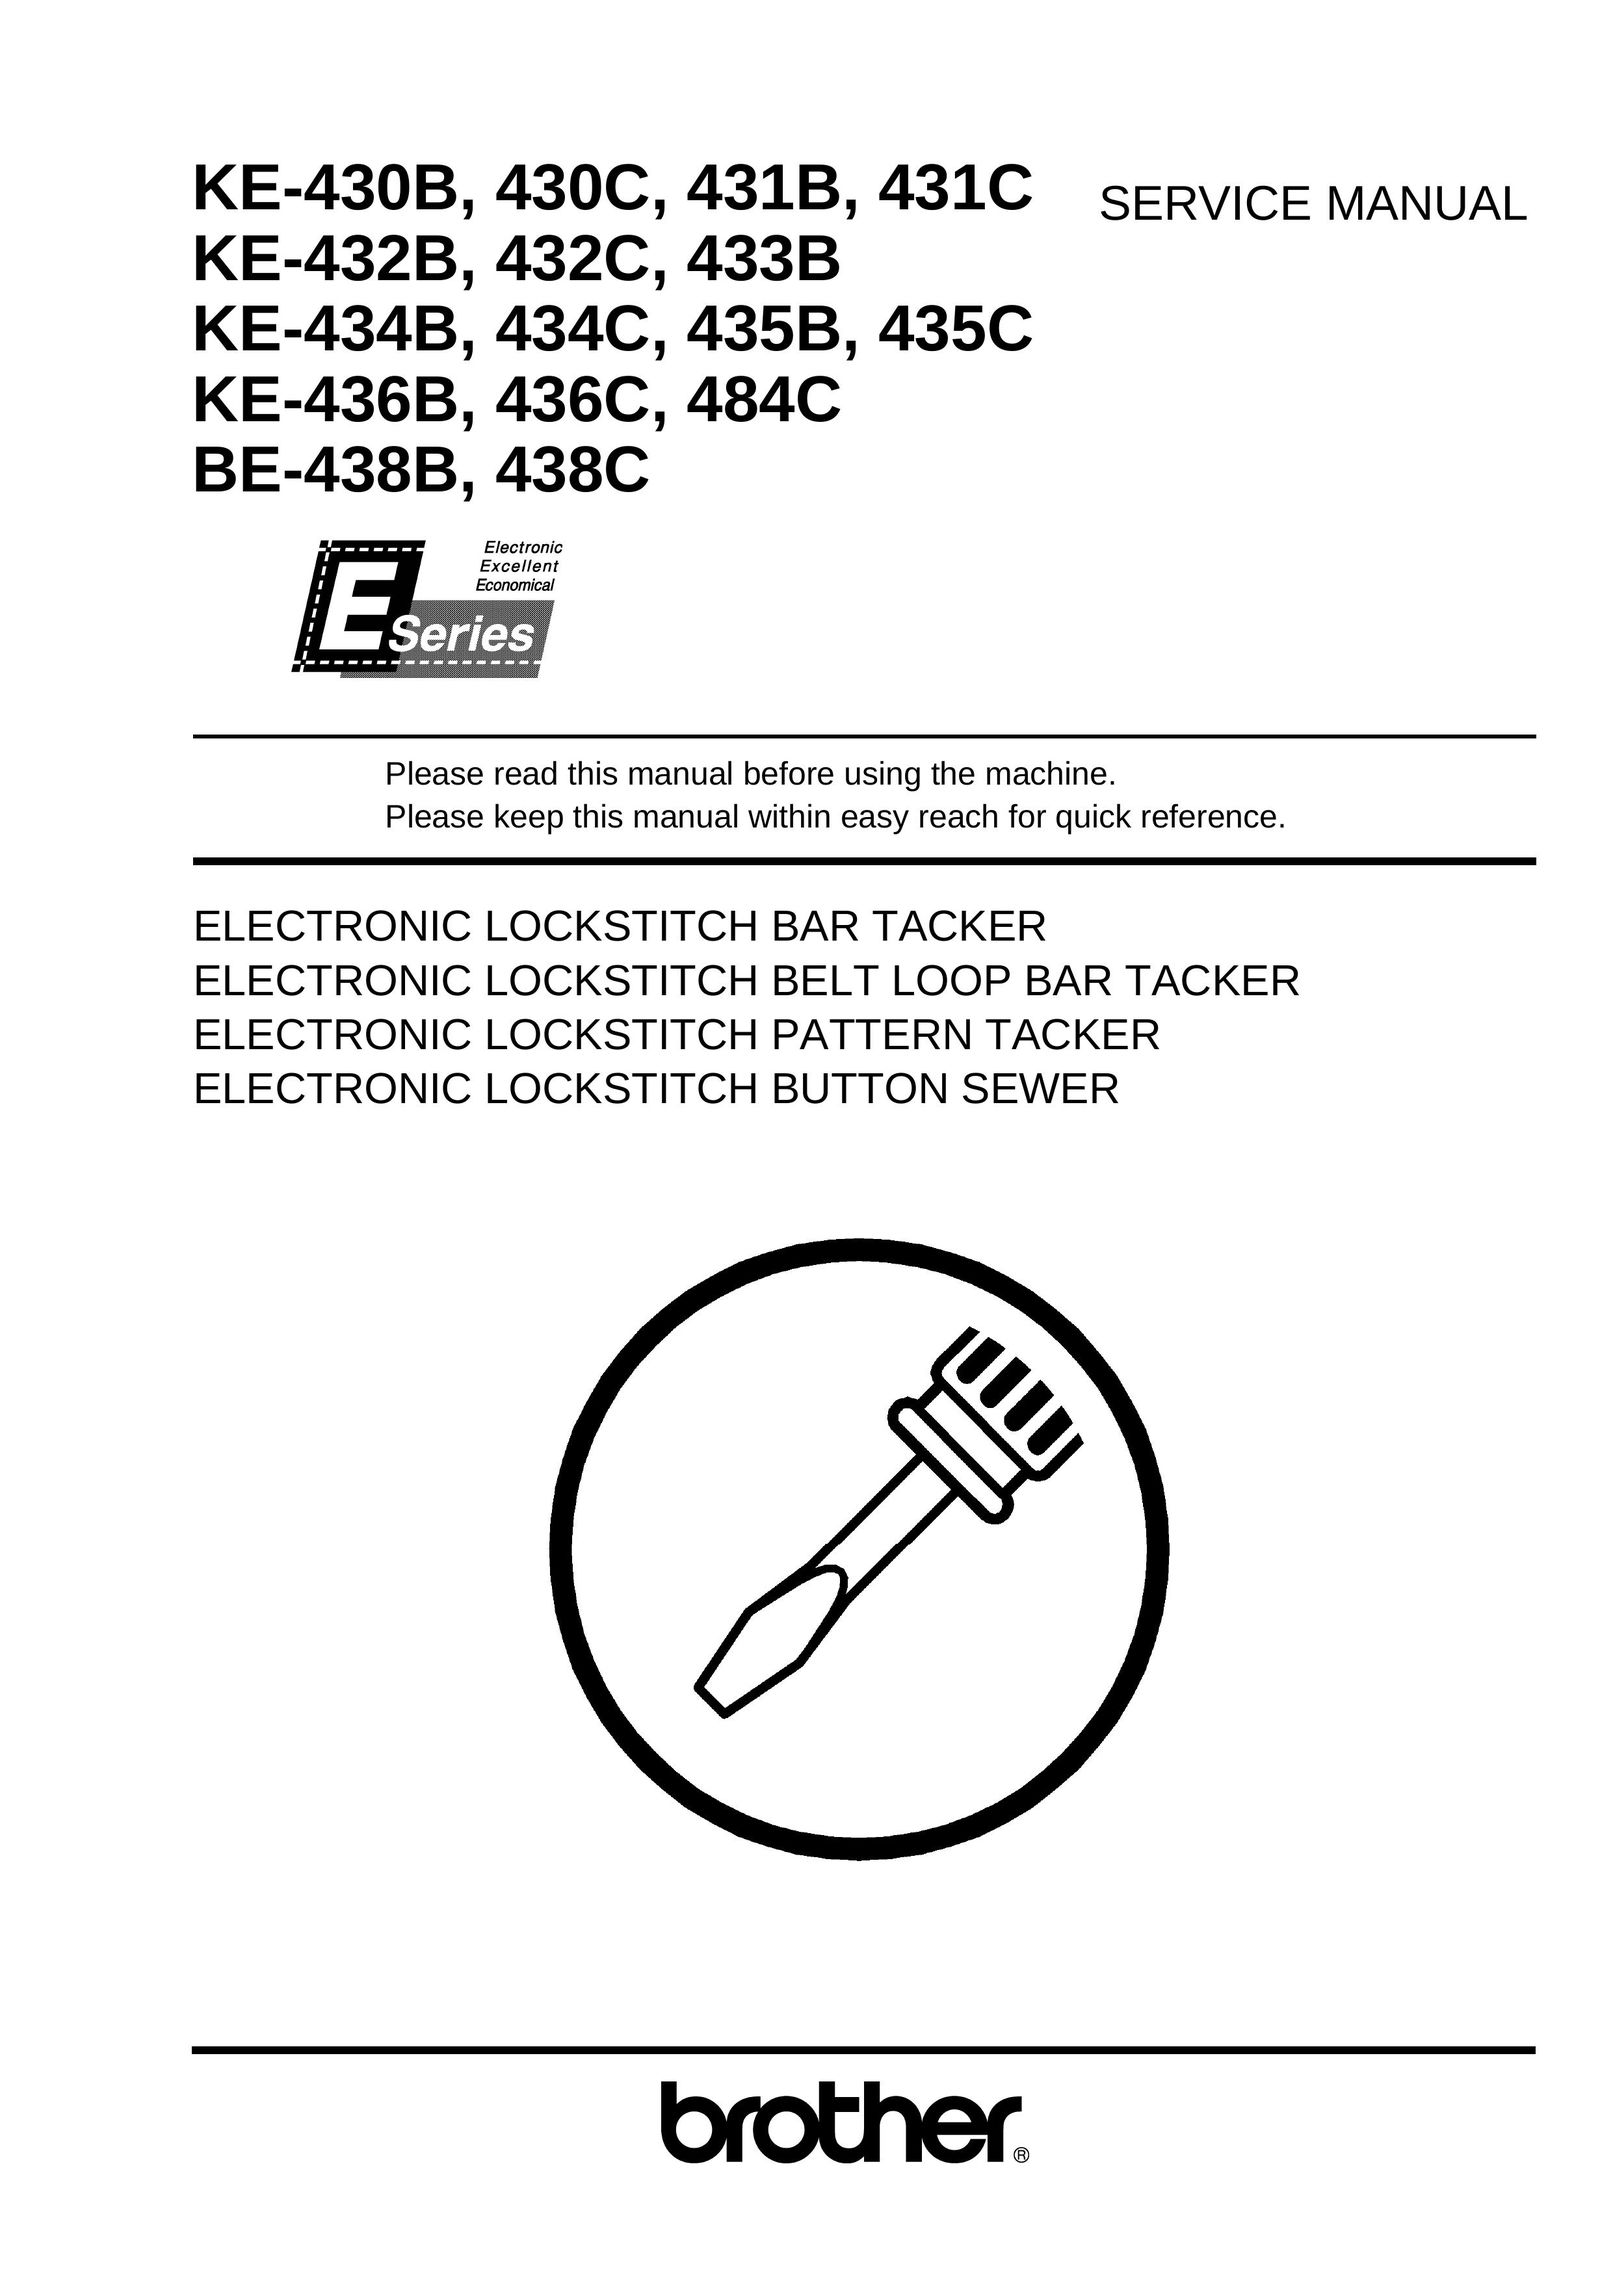 Brother 432C Sewing Machine User Manual